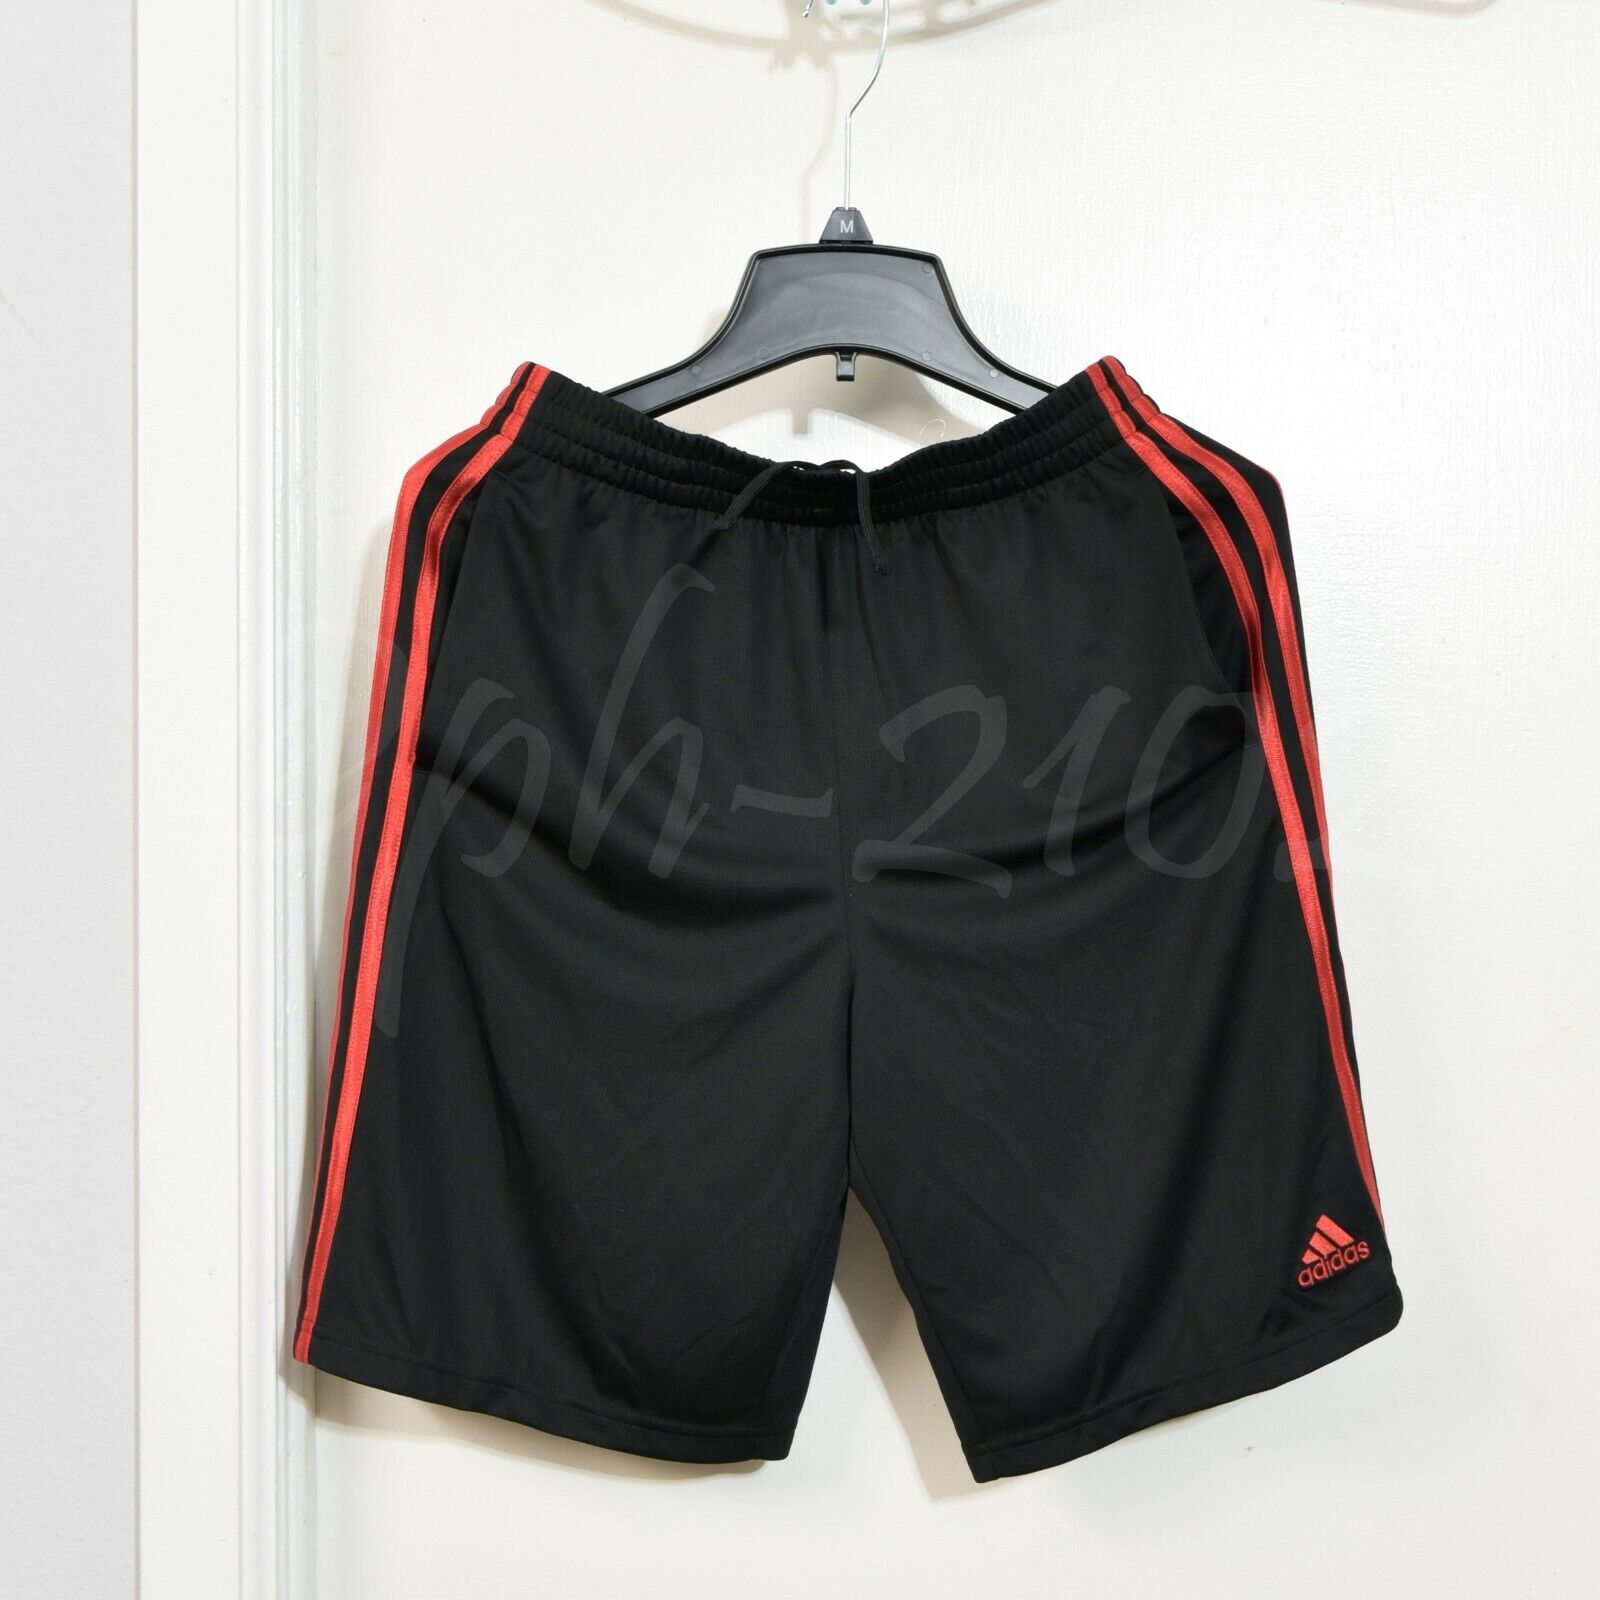 Adidas Boys' Youth Shorts In 4 Colors